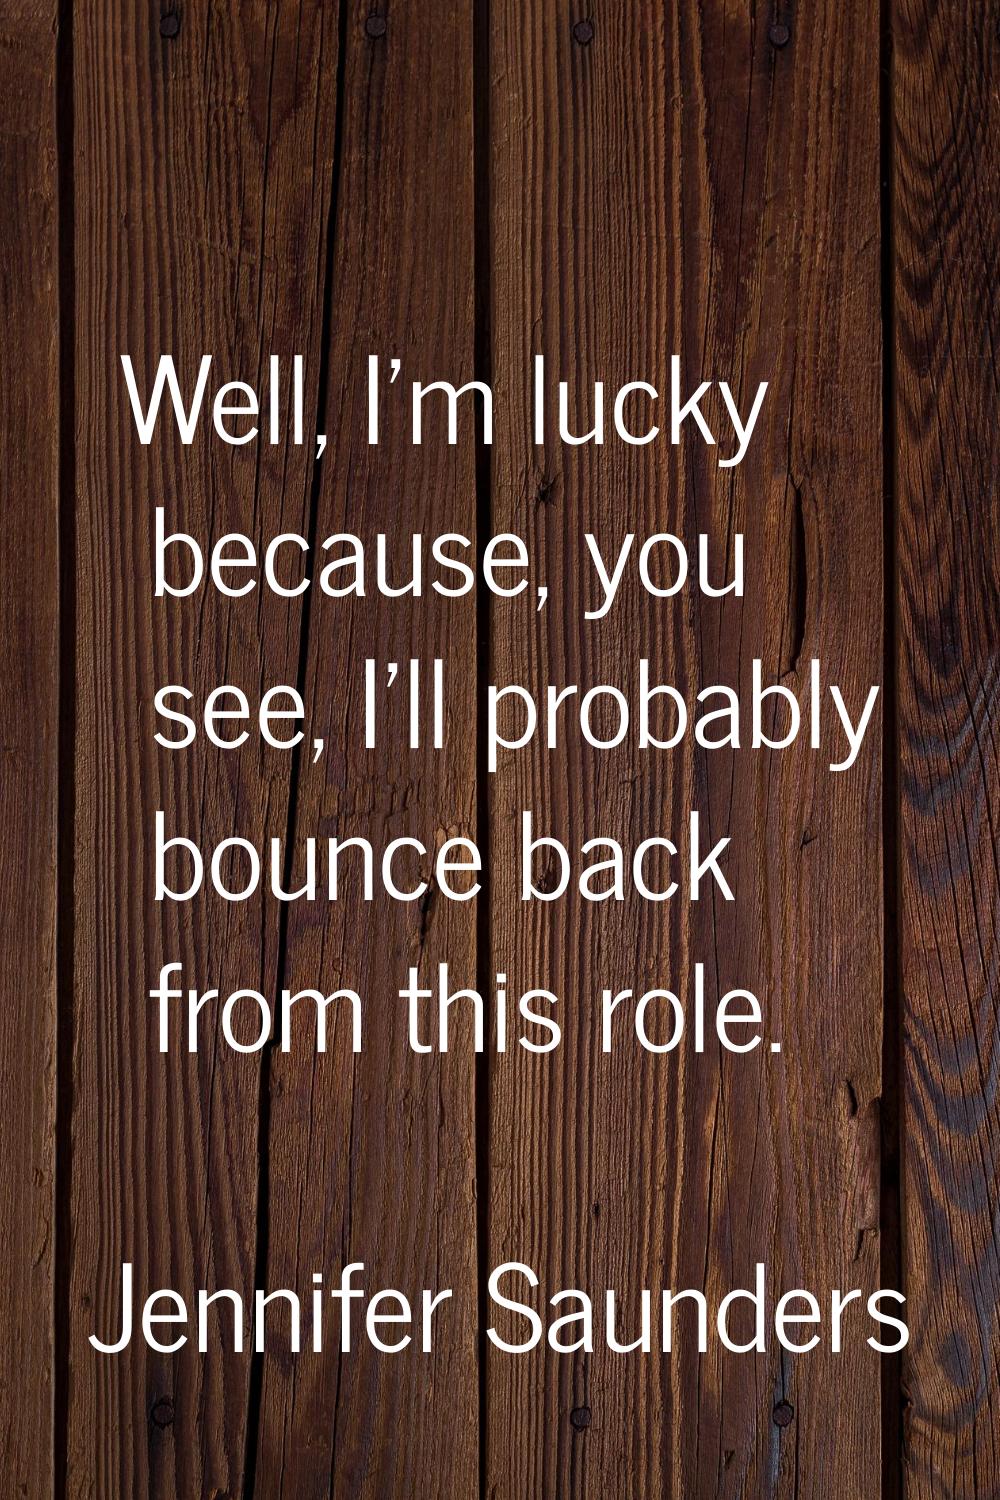 Well, I'm lucky because, you see, I'll probably bounce back from this role.